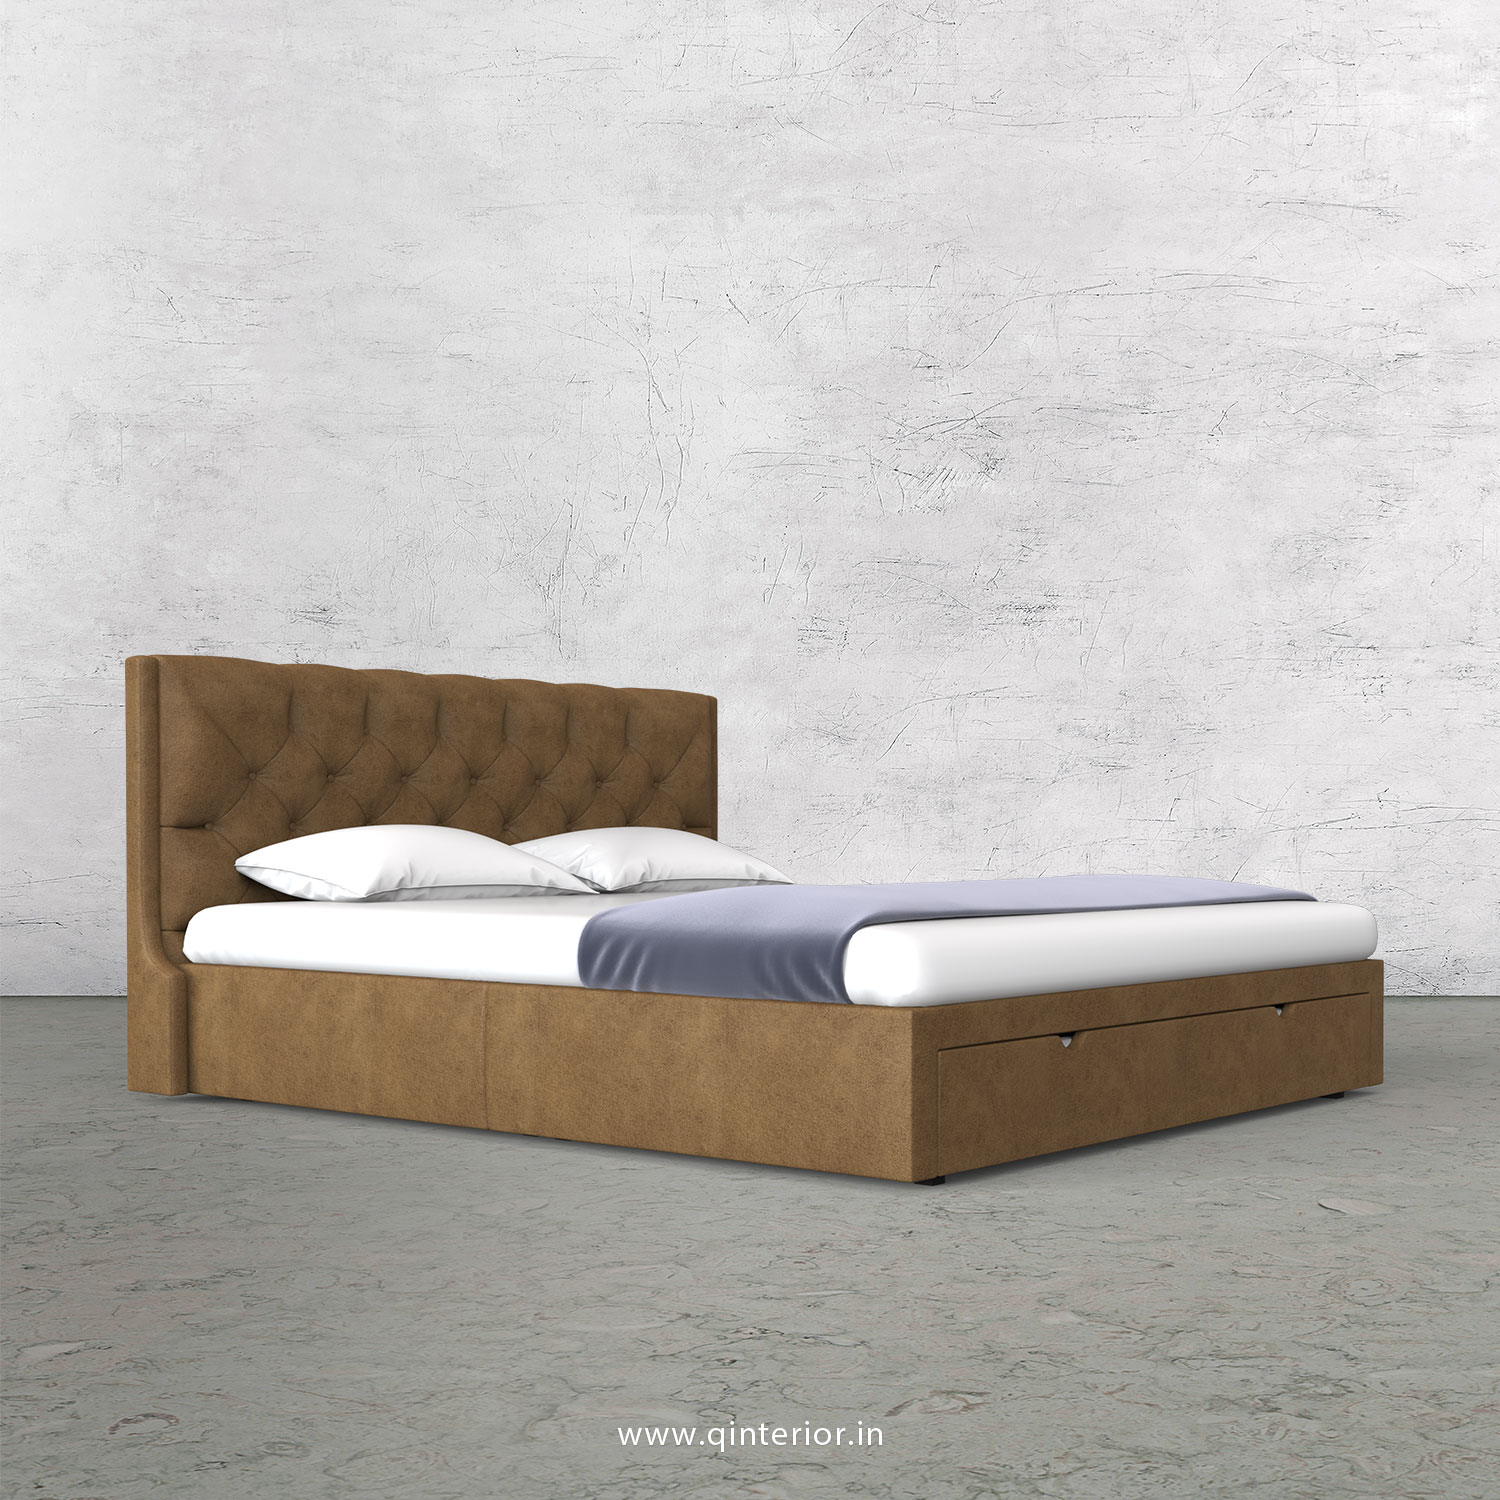 Scorpius King Size Storage Bed in Fab Leather Fabric - KBD001 FL02